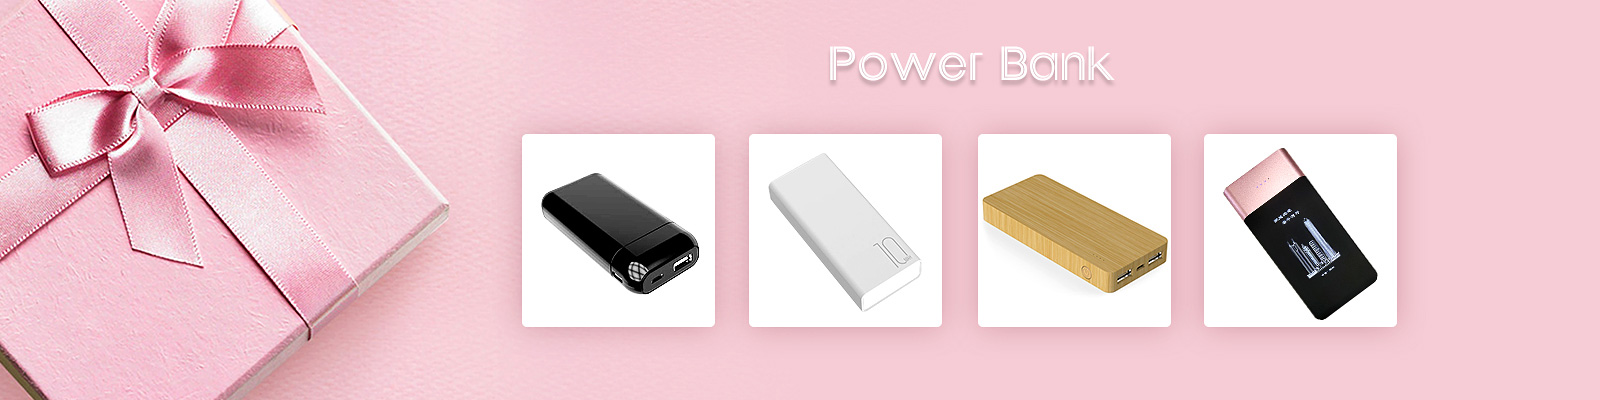 Solar power bank | Power bank 10000mah | Best power bank | leadway group limited